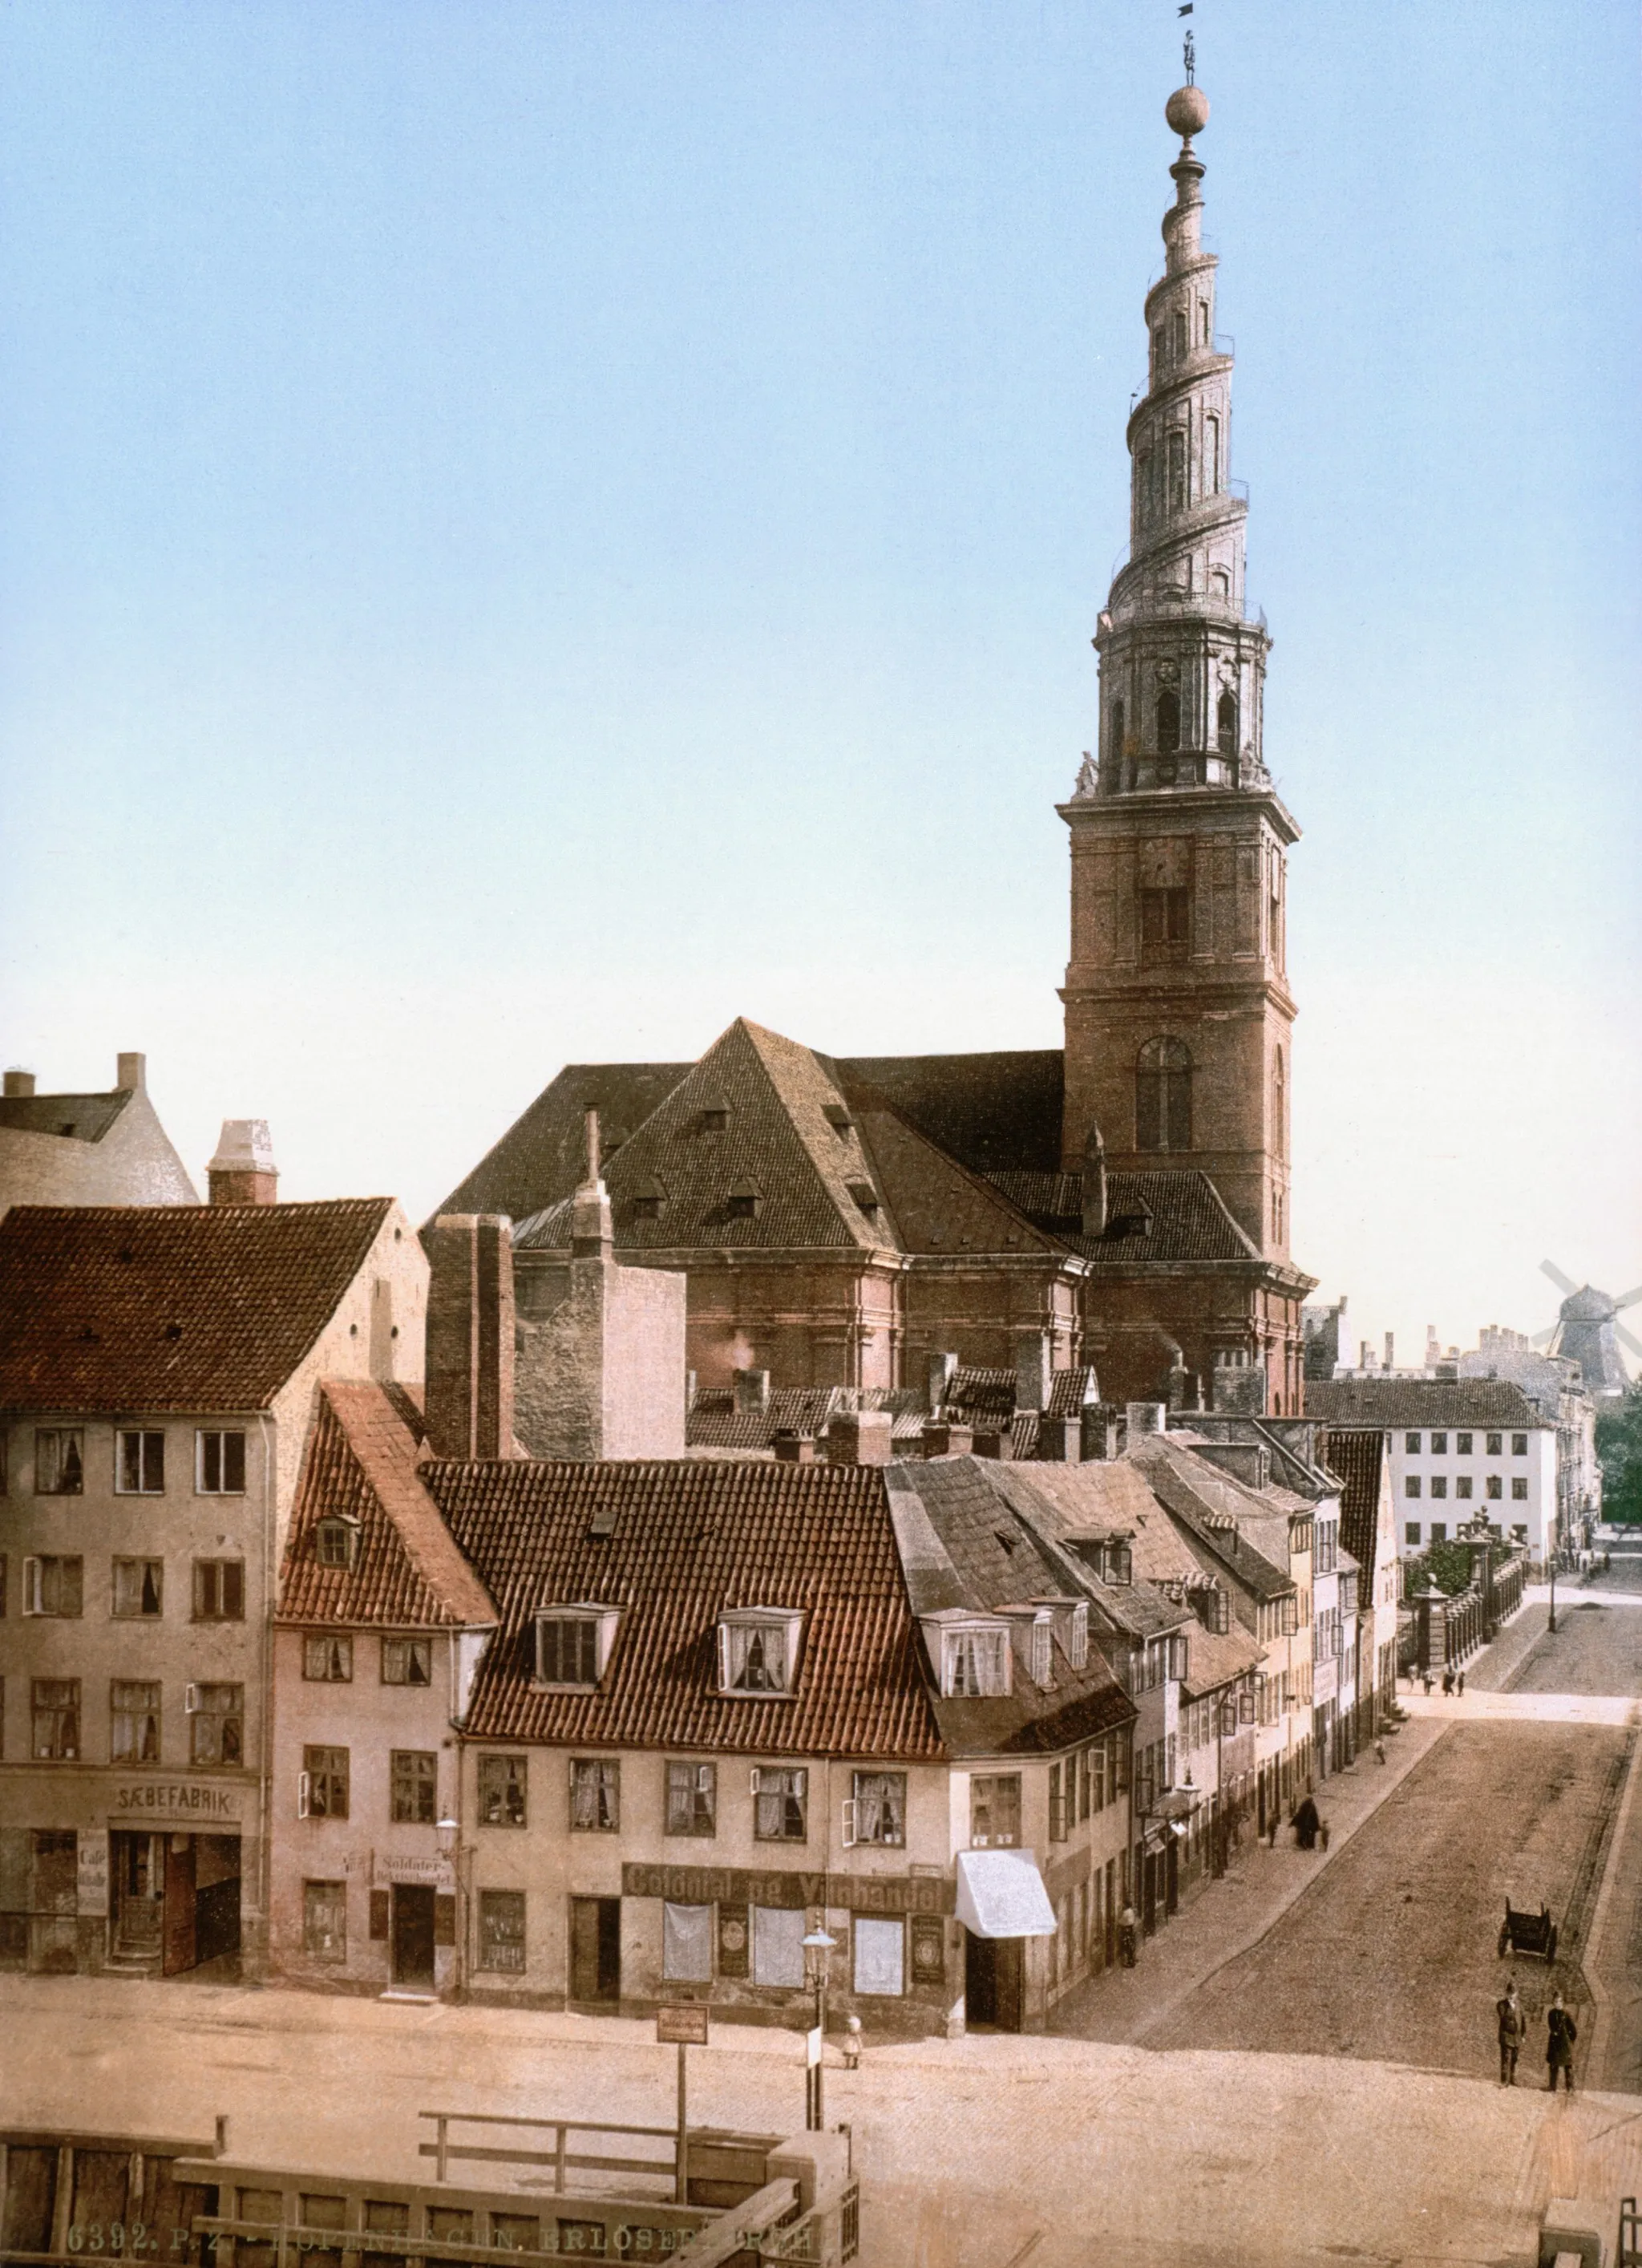 Photo showing: [Saviour Church, Copenhagen, Denmark]
[between ca. 1890 and ca. 1900].
1 photomechanical print : photochrom, color.
Notes:
Title from the Detroit Publishing Co., catalogue J, foreign section. Detroit, Mich. : Detroit Publishing Company, c1905.
Print no. 6392.
Forms part of: Views of architecture and other sites in Copenhagen, Denmark in the Photochrom print collection.
Subjects:
Denmark--Copenhagen.
Format: Photochrom prints--Color--1890-1900.
Rights Info: No known restrictions on publication.
Repository: Library of Congress, Prints and Photographs Division, Washington, D.C. 20540 USA, hdl.loc.gov/loc.pnp/pp.print
Part Of: Views of architecture and other sites in Copenhagen, Denmark (DLC)  2001697980
More information about the Photochrom Print Collection is available at hdl.loc.gov/loc.pnp/pp.pgz
Persistent URL: hdl.loc.gov/loc.pnp/ppmsc.05752

Call Number: LOT 13421, no. 007 [item]